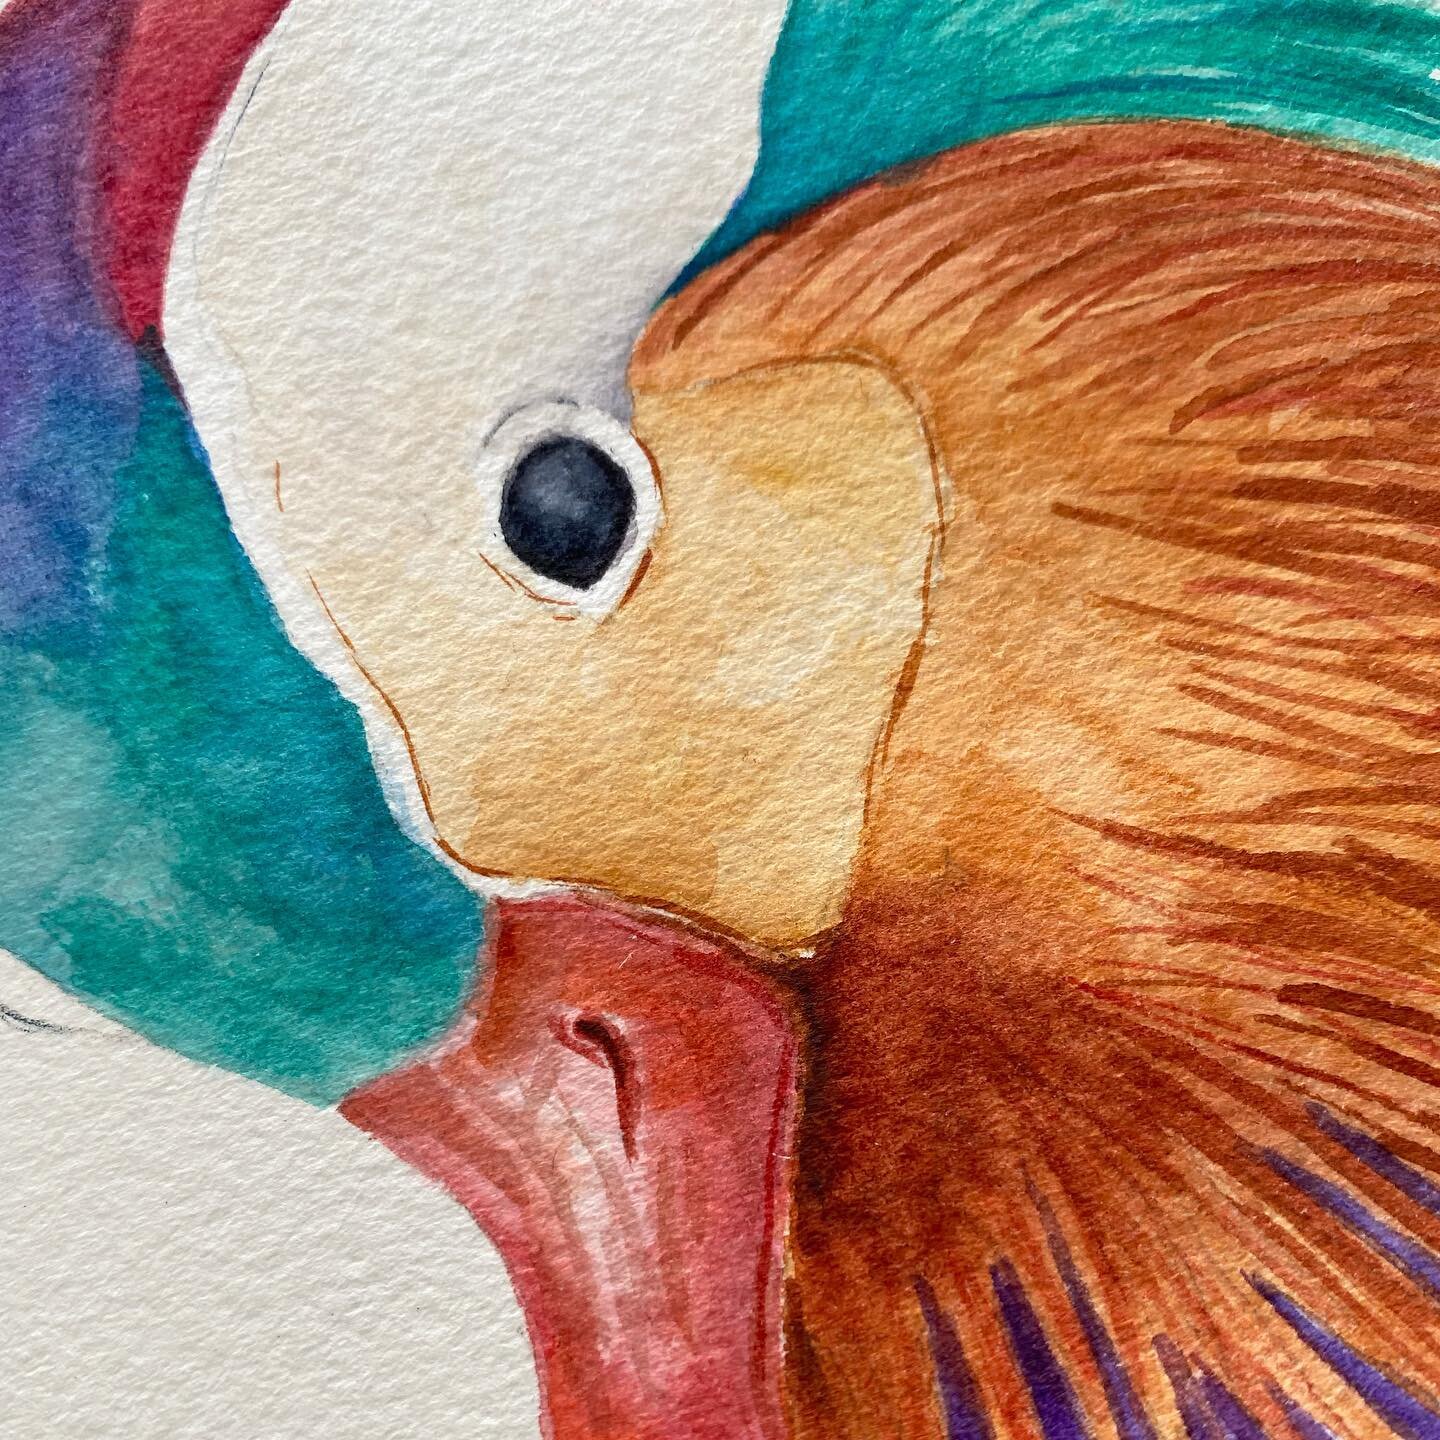 First time I&rsquo;ve felt confident enough to pick up my brushes in more than six months. Just a practice run, but I think I&rsquo;m doing OK. 

#practicemakesperfect #practicerun #workinprogress #watercolour #watercolours #mandarinduck #mandarinduc